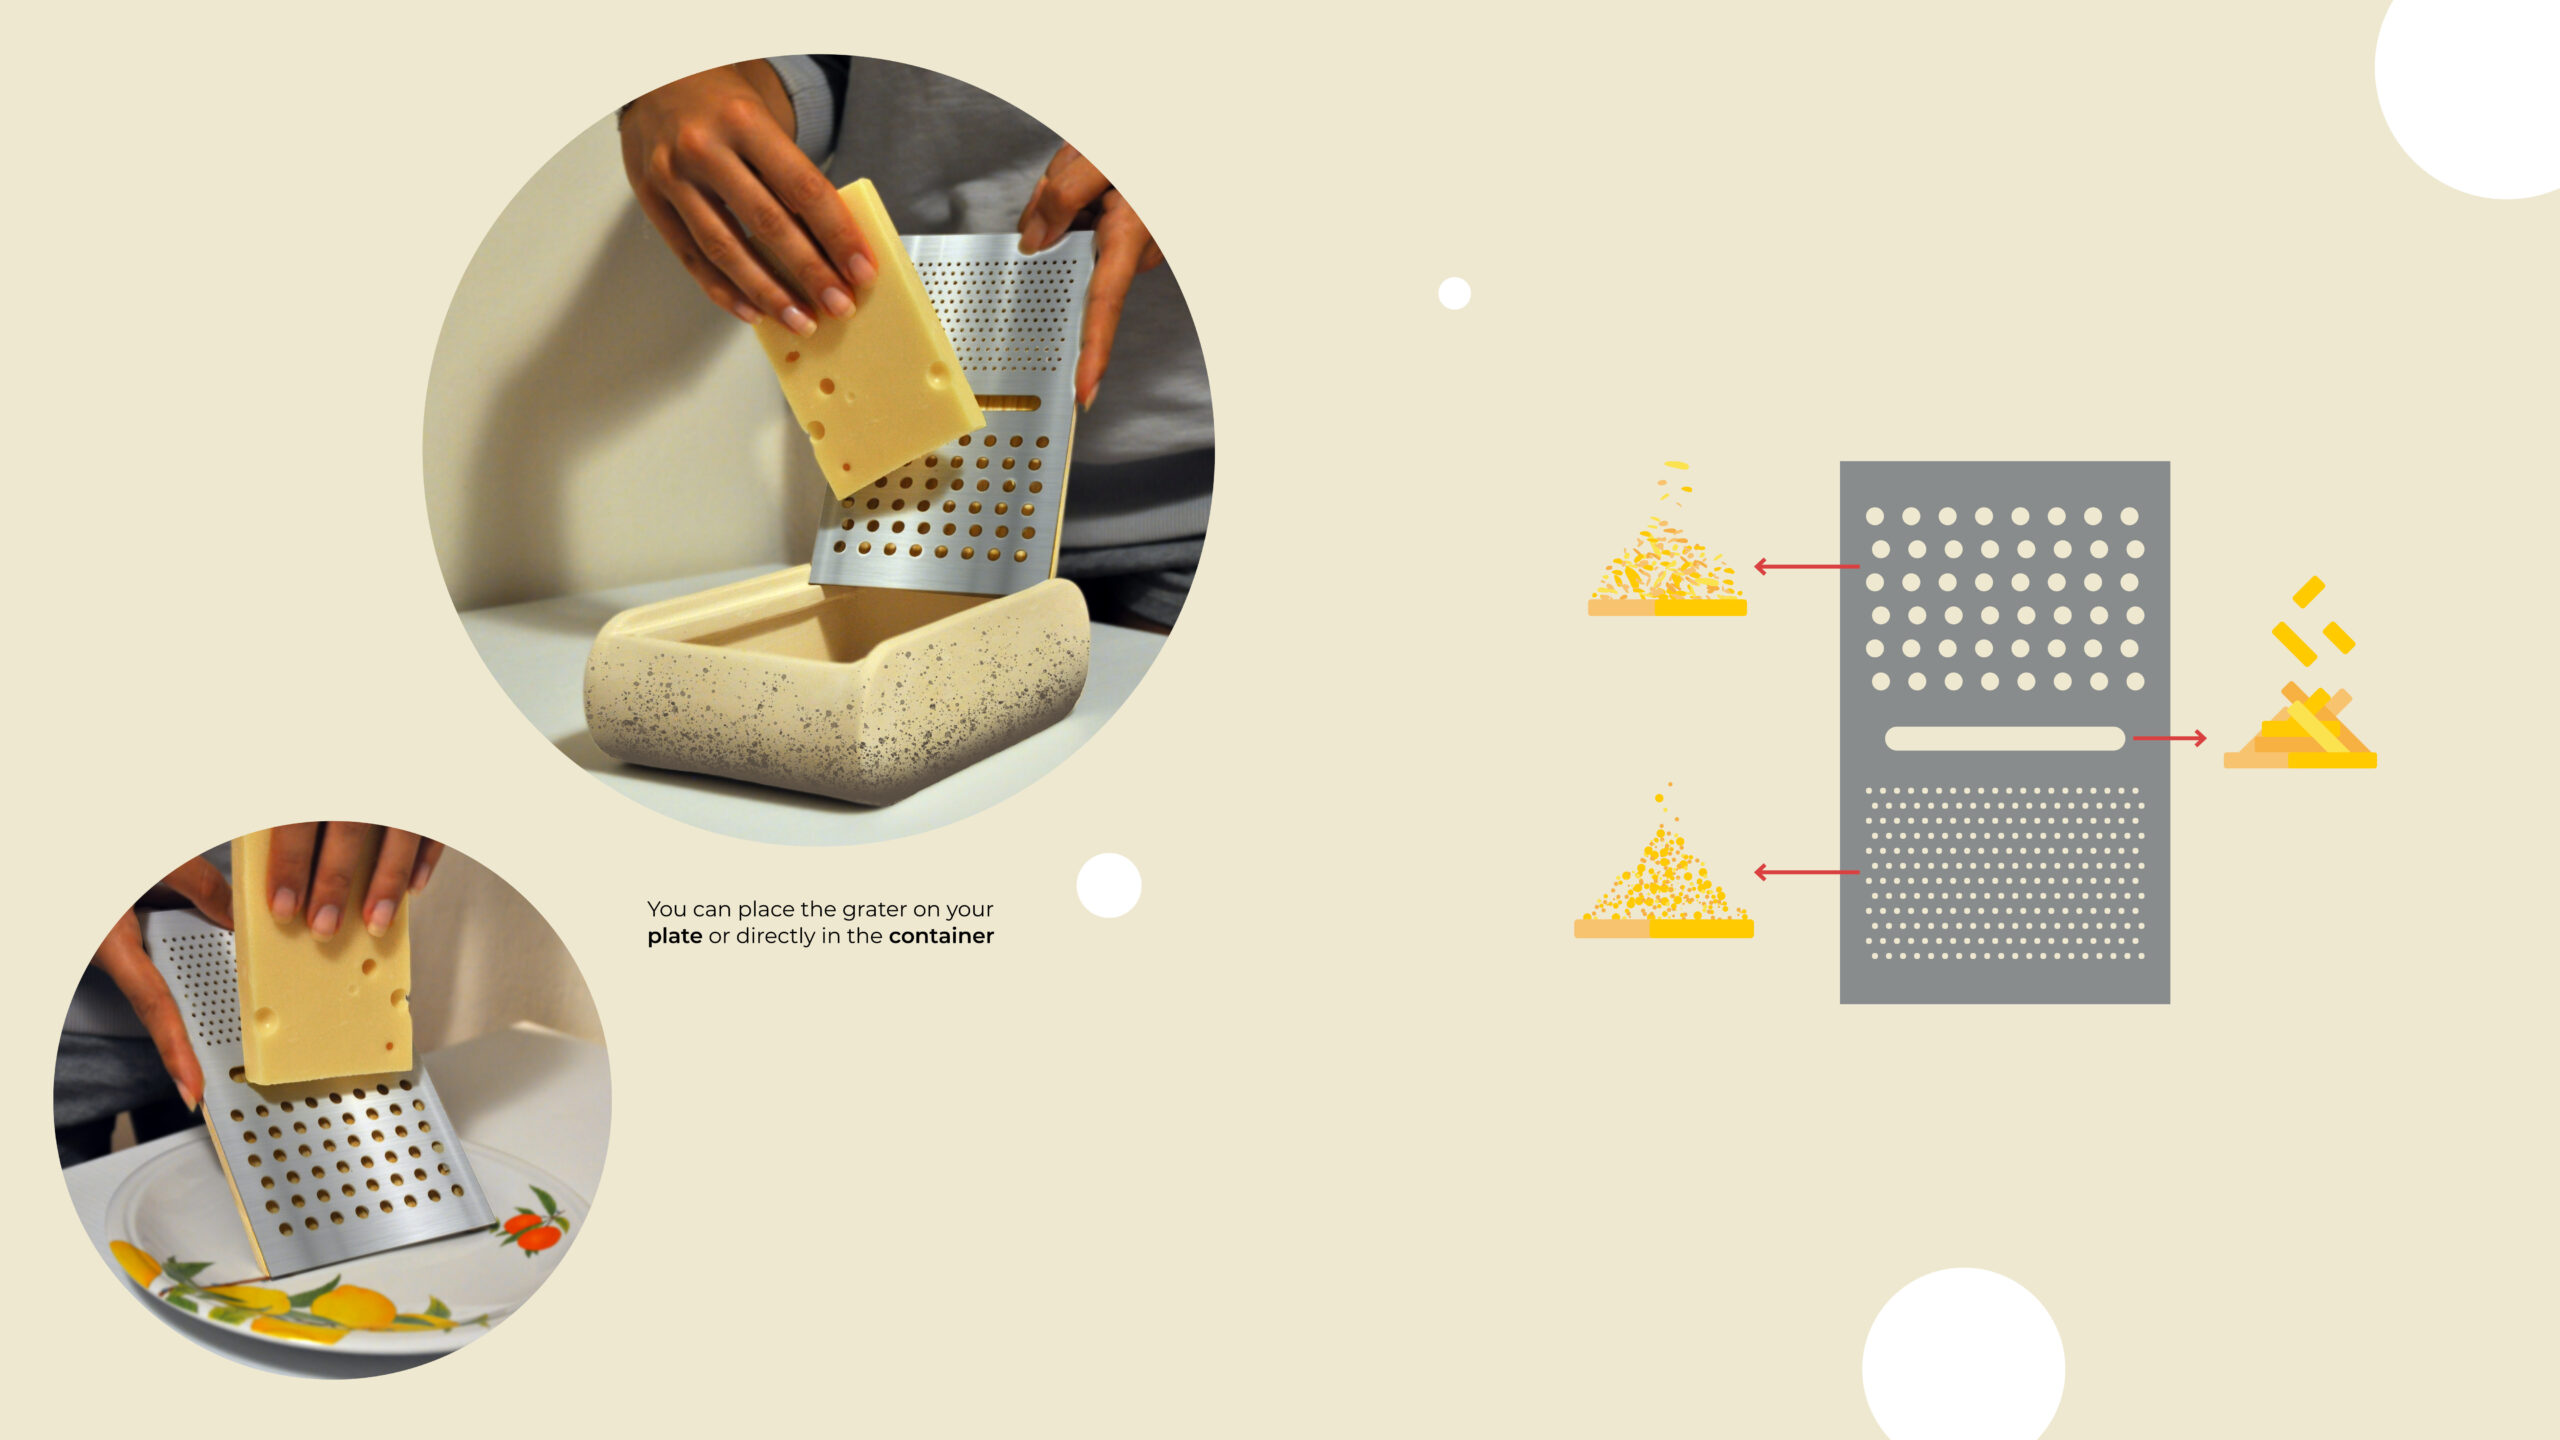 Description of the concept: how to use the grater